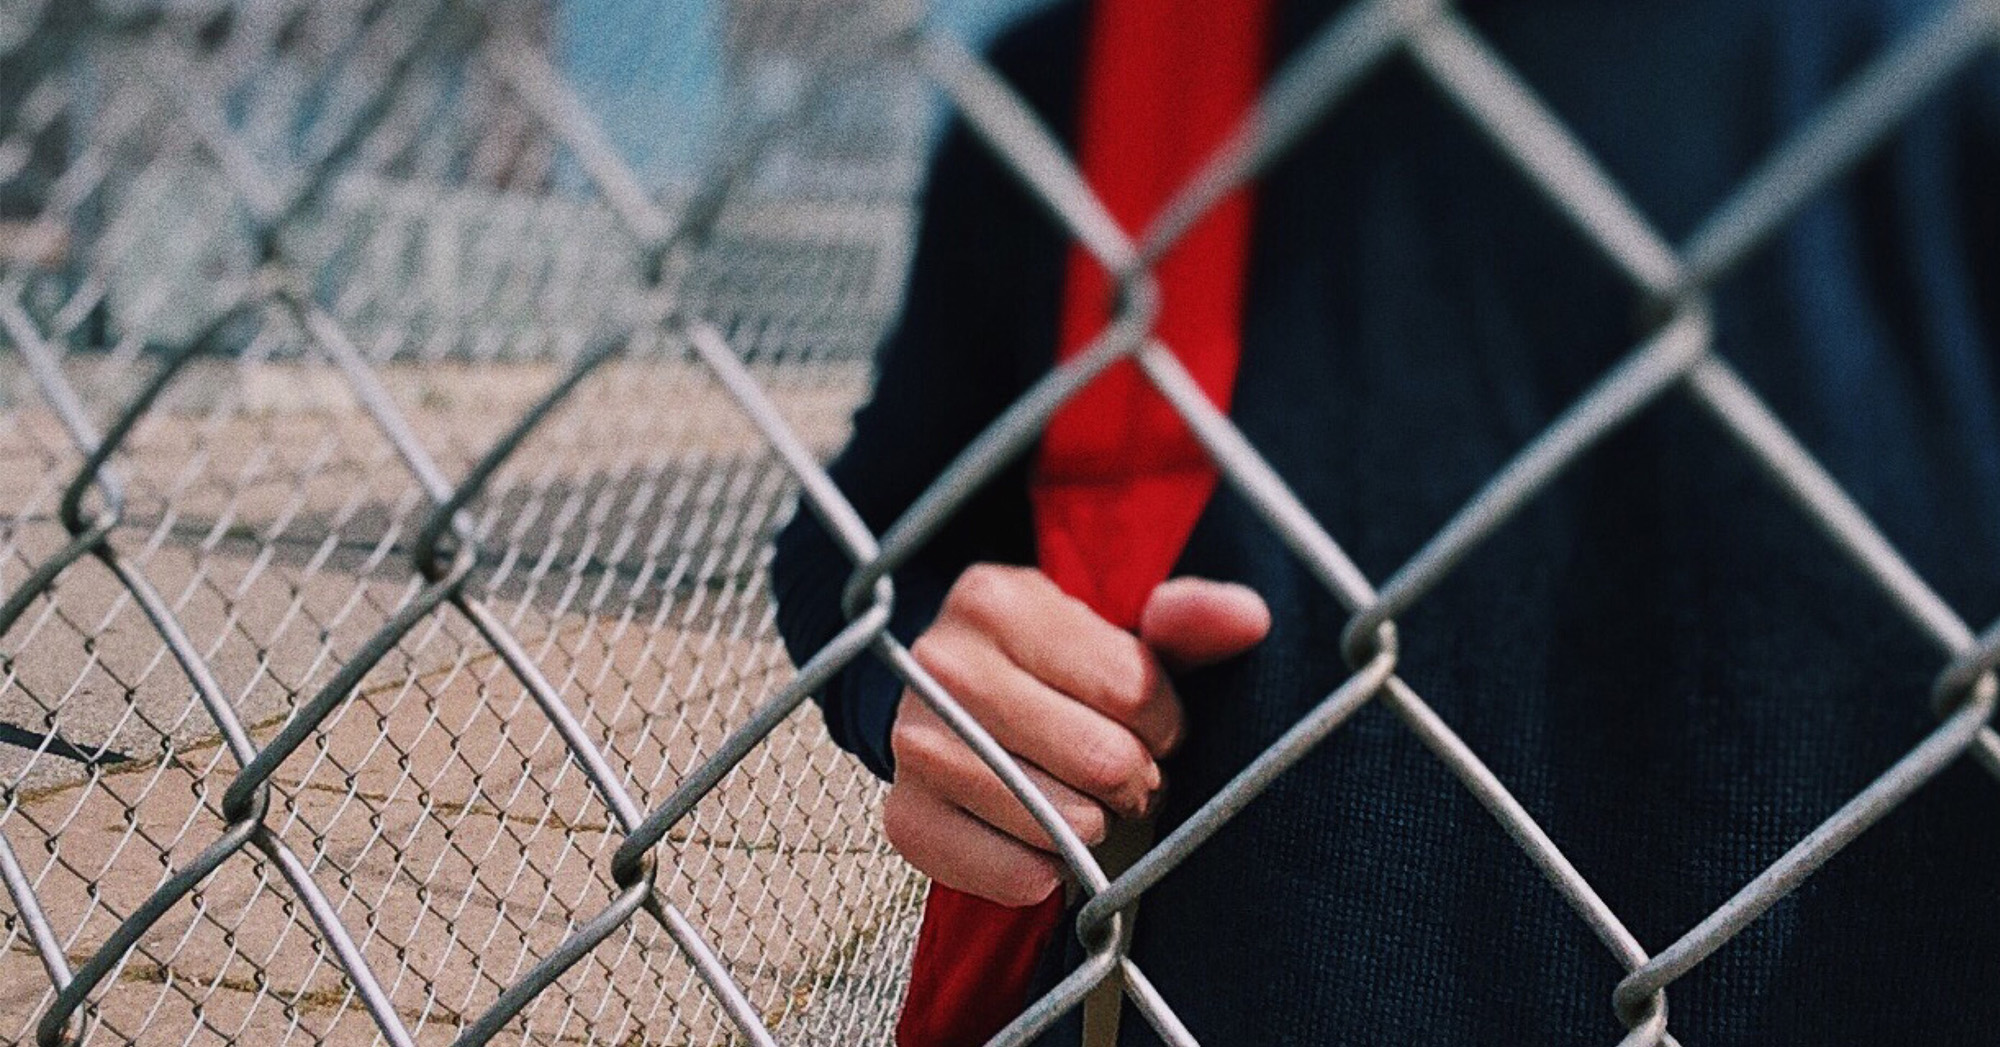 Hand holding red scarf in front of a fence